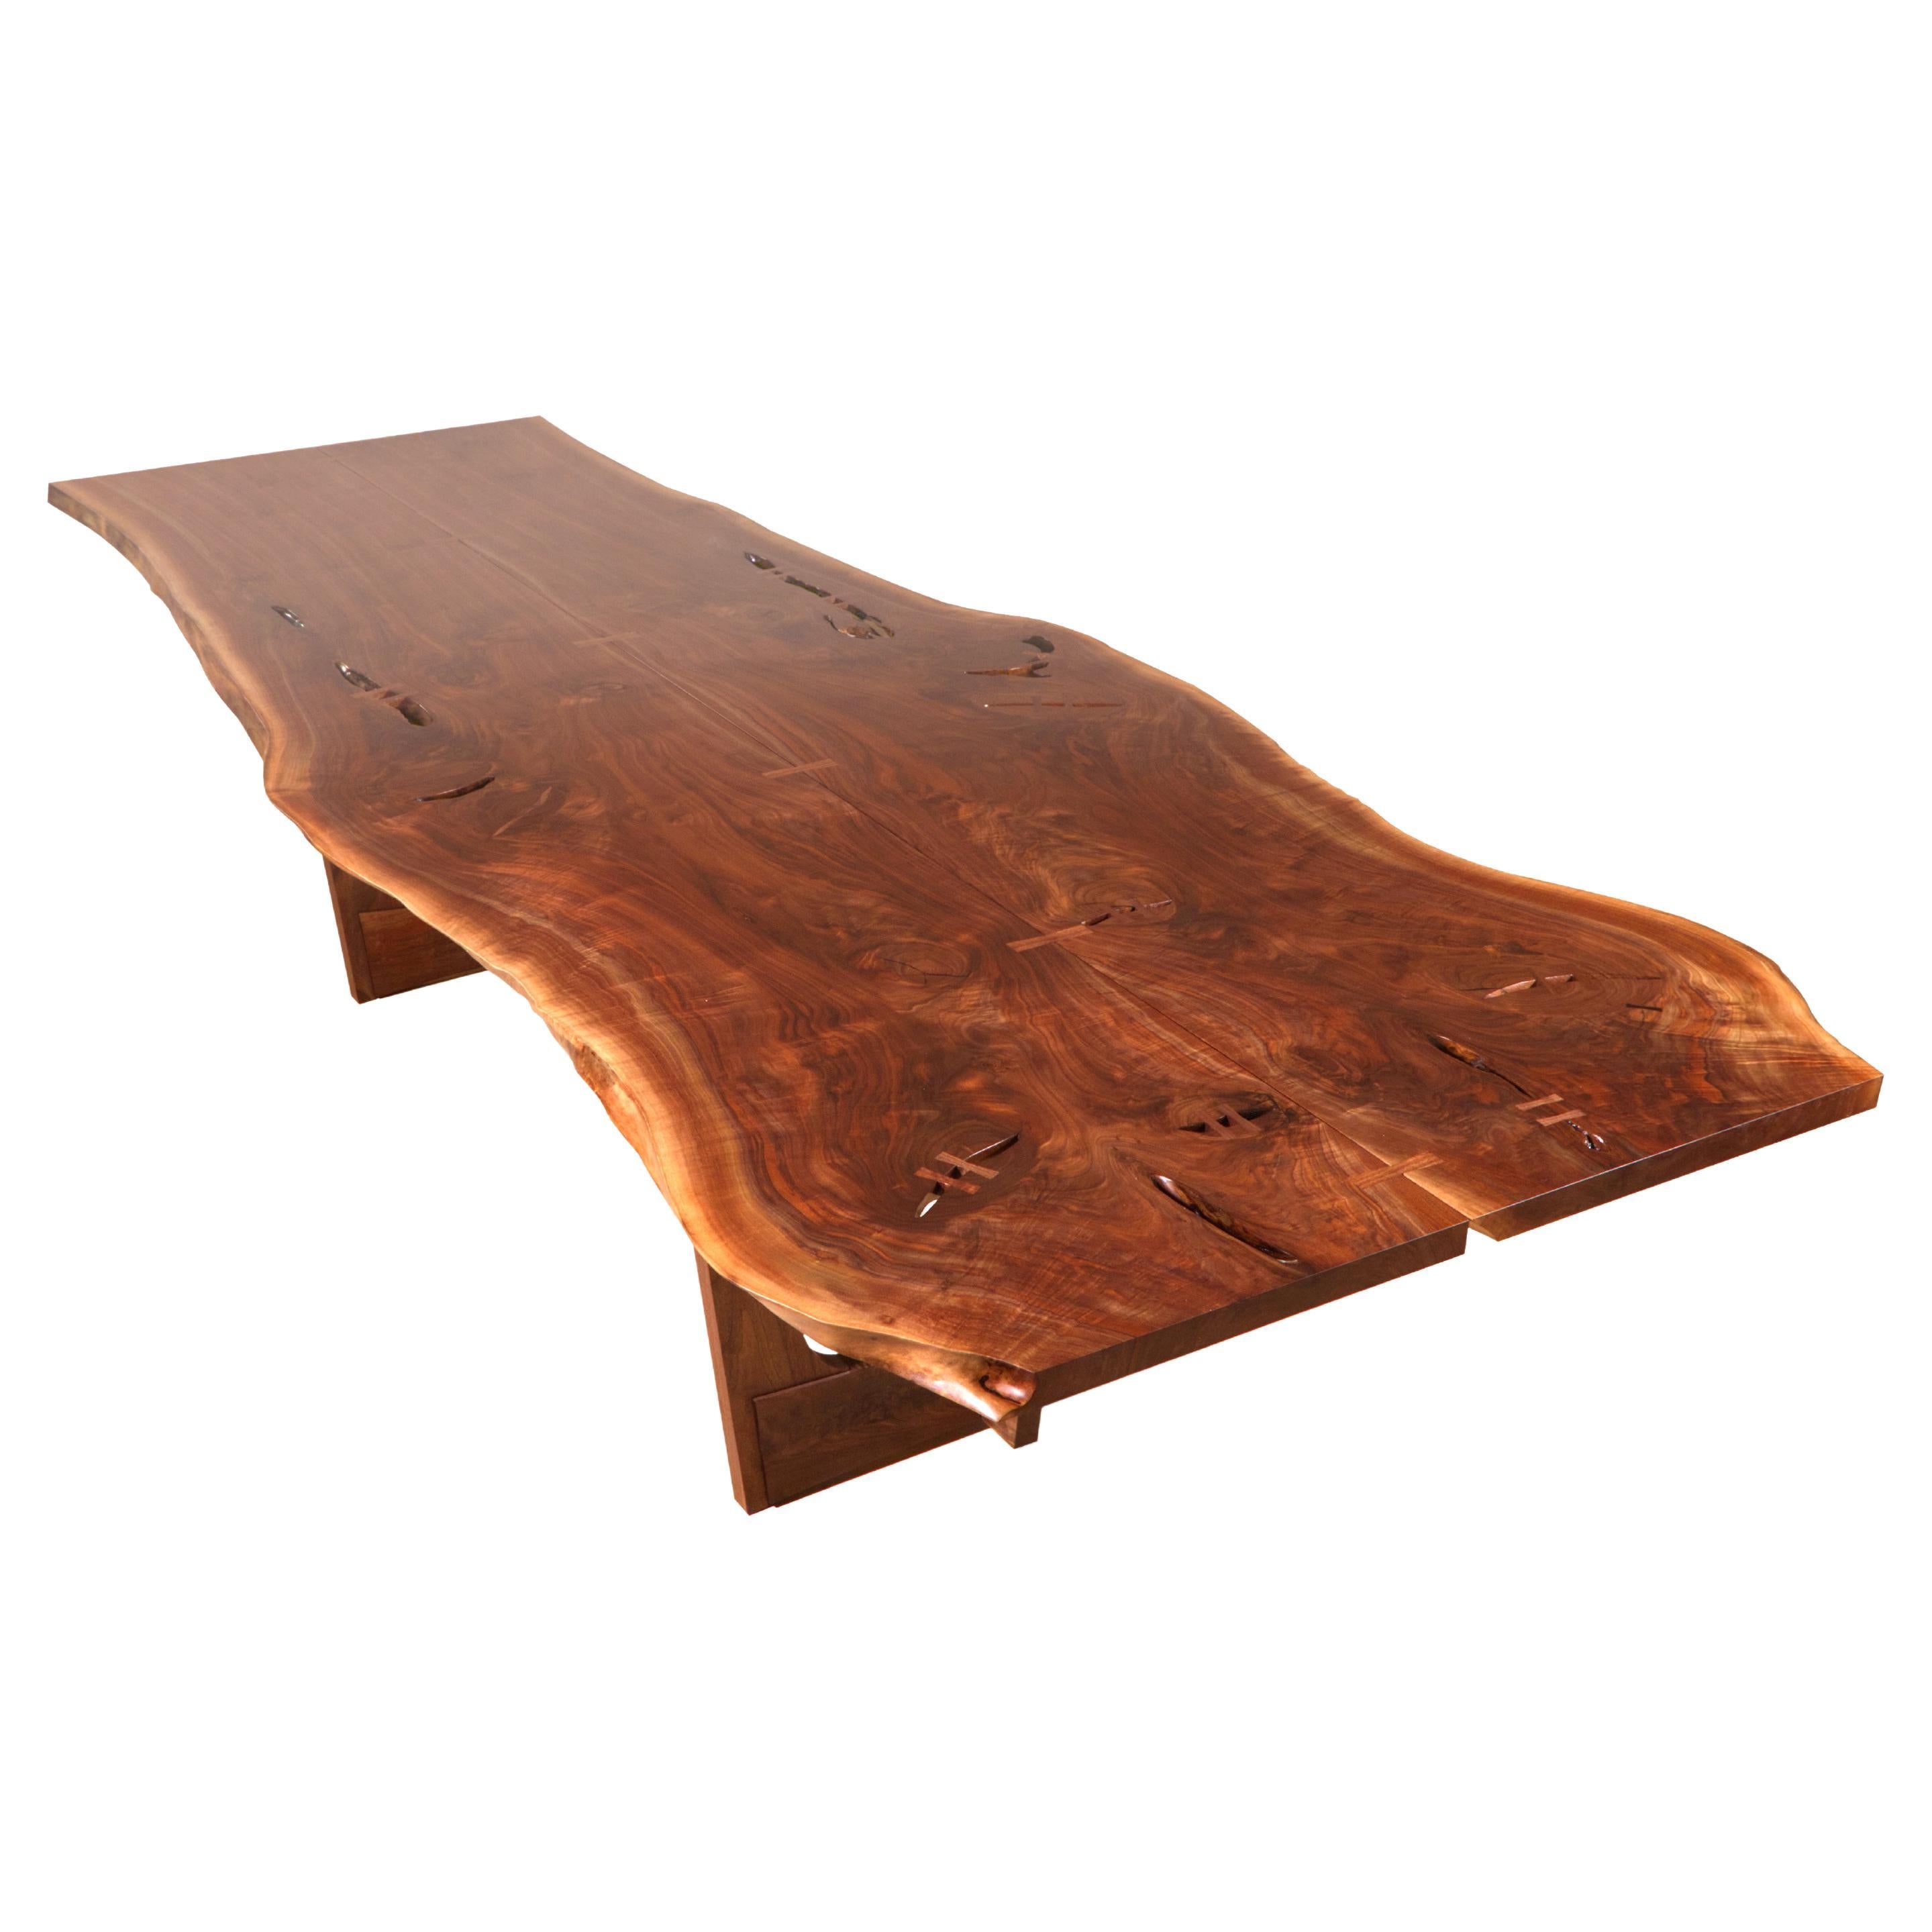 Incredible Rustic Book-Matched Walnut Dining Table with Walnut Trestle Base For Sale